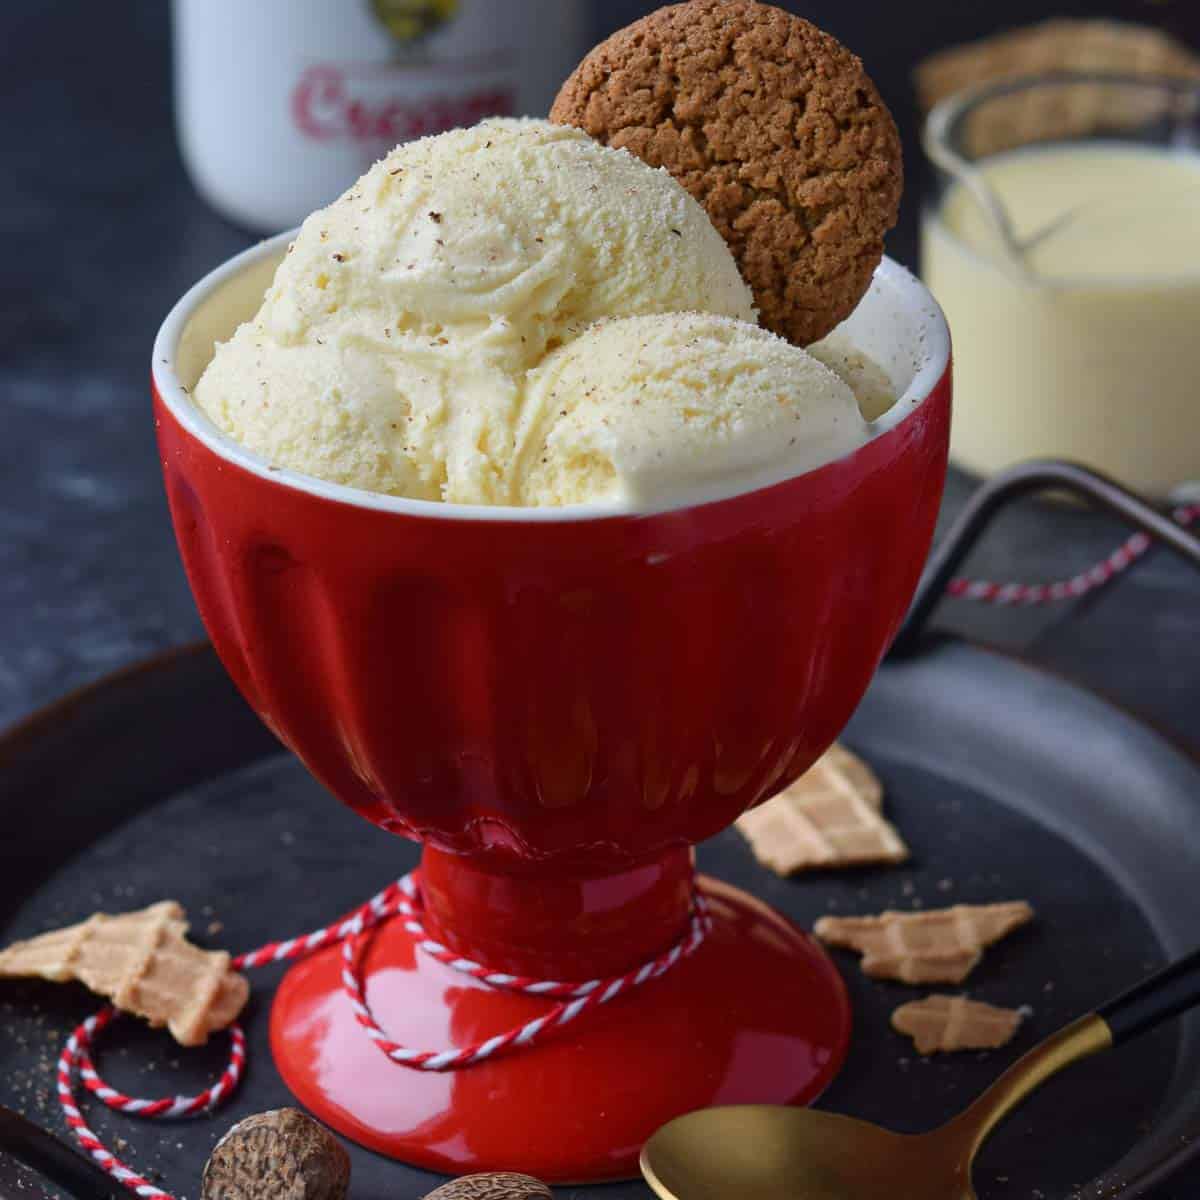 Eggnog ice cream in a red ice cream bowl with waffle cone pieces and gingersnaps around it.